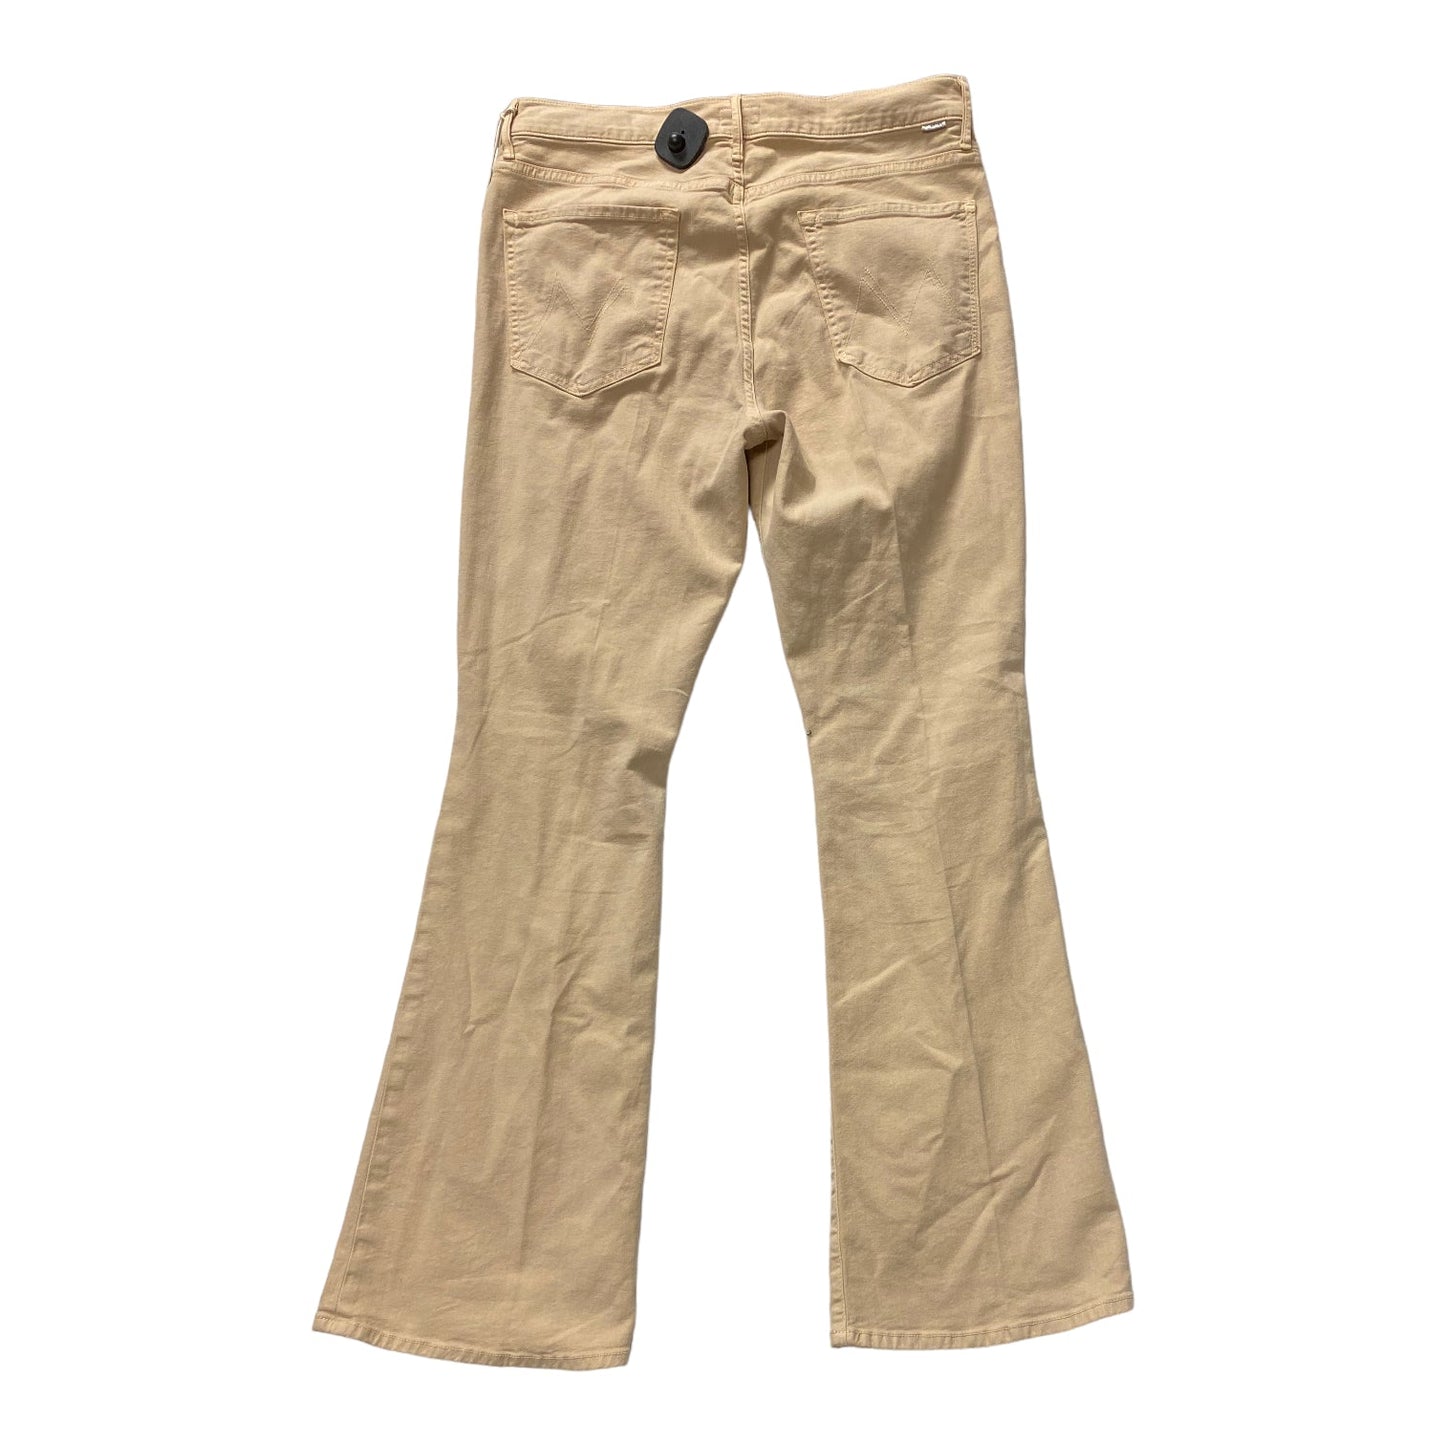 Tan Jeans Flared Mother, Size 16